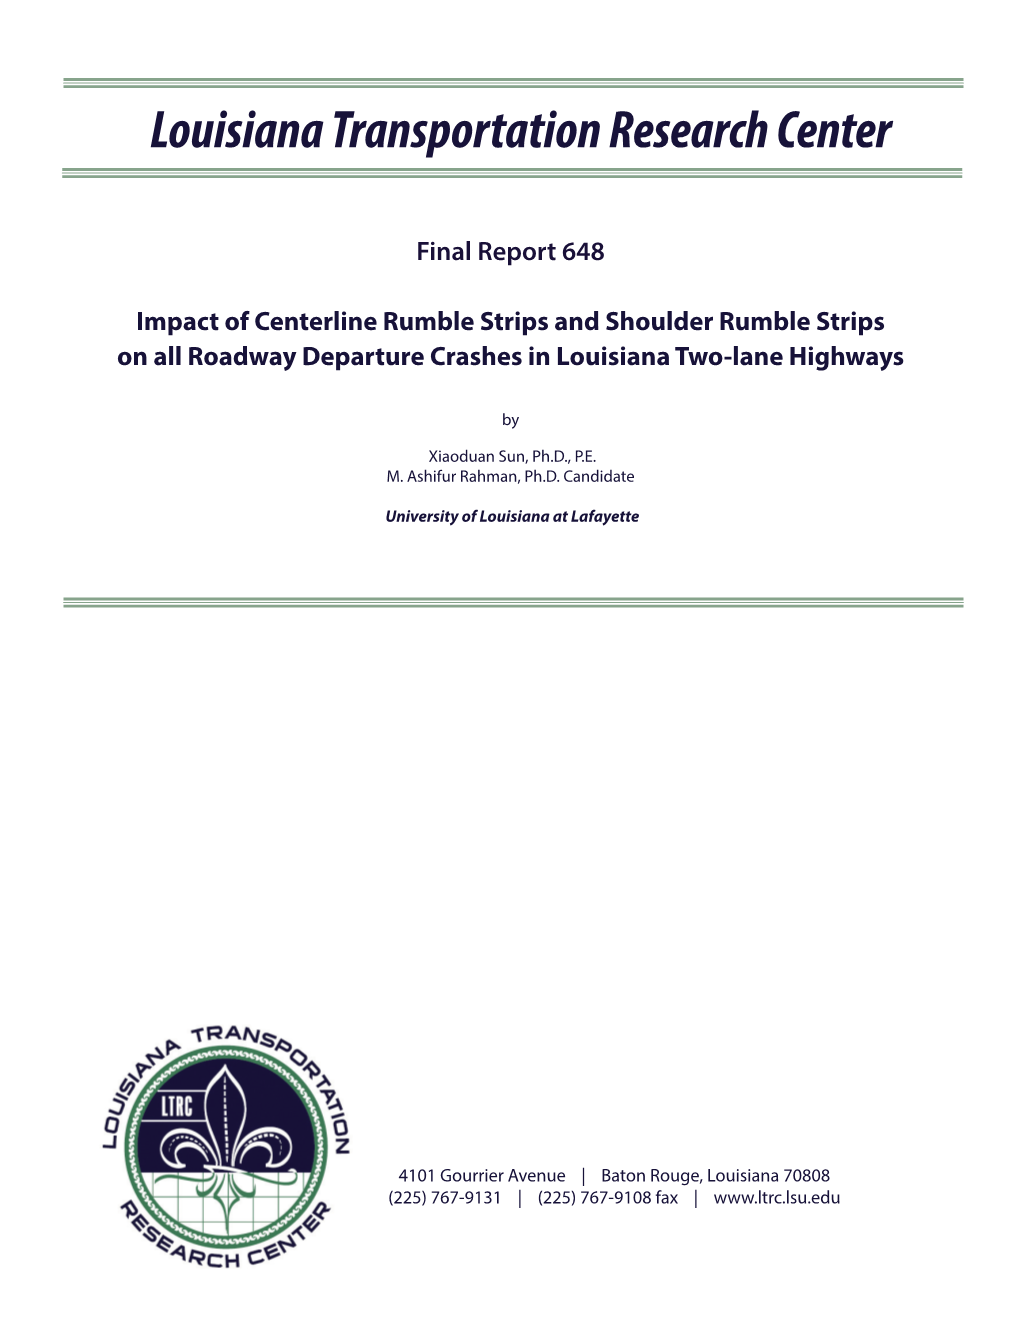 Impact of Centerline Rumble Strips and Shoulder Rumble Strips on All Roadway Departure Crashes in Louisiana Two-Lane Highways